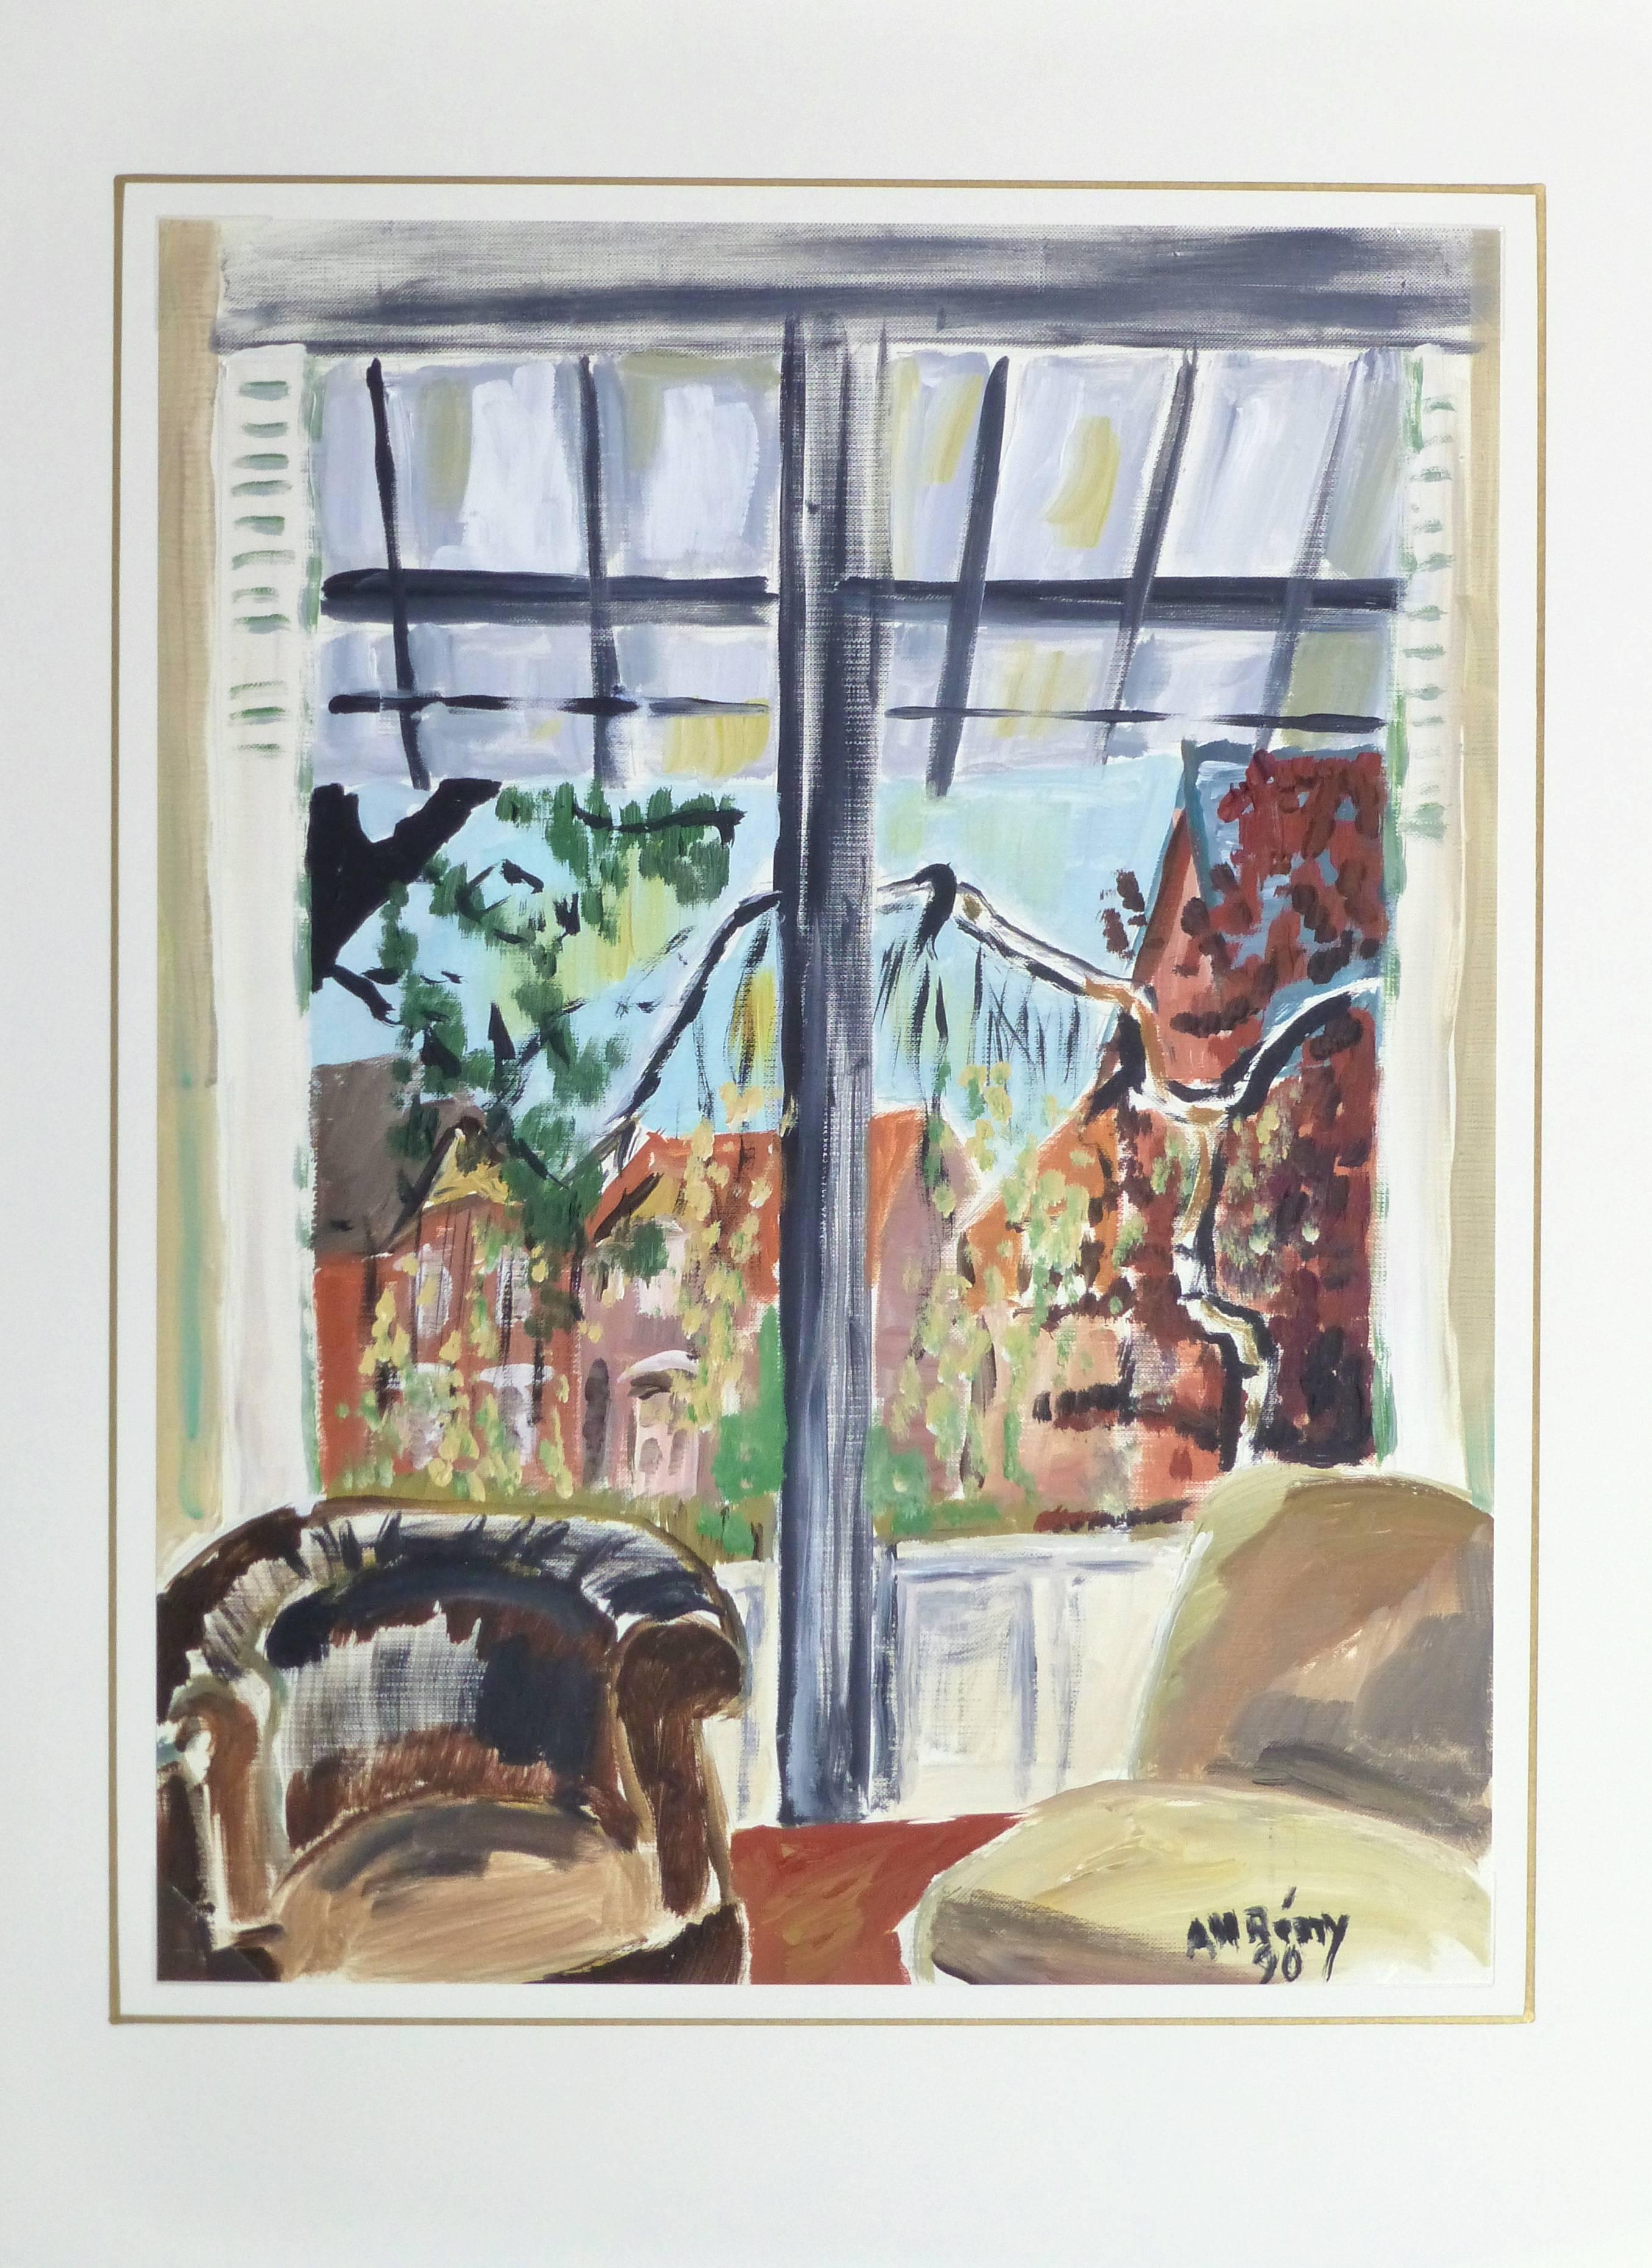 Bright and airy acrylic painting of the peaceful view of the outdoors from a cozy veranda by French artist A.M. Rémy, 1970. Signed and dated lower right.

Original artwork on paper displayed on a white mat with a gold border. Mat fits a